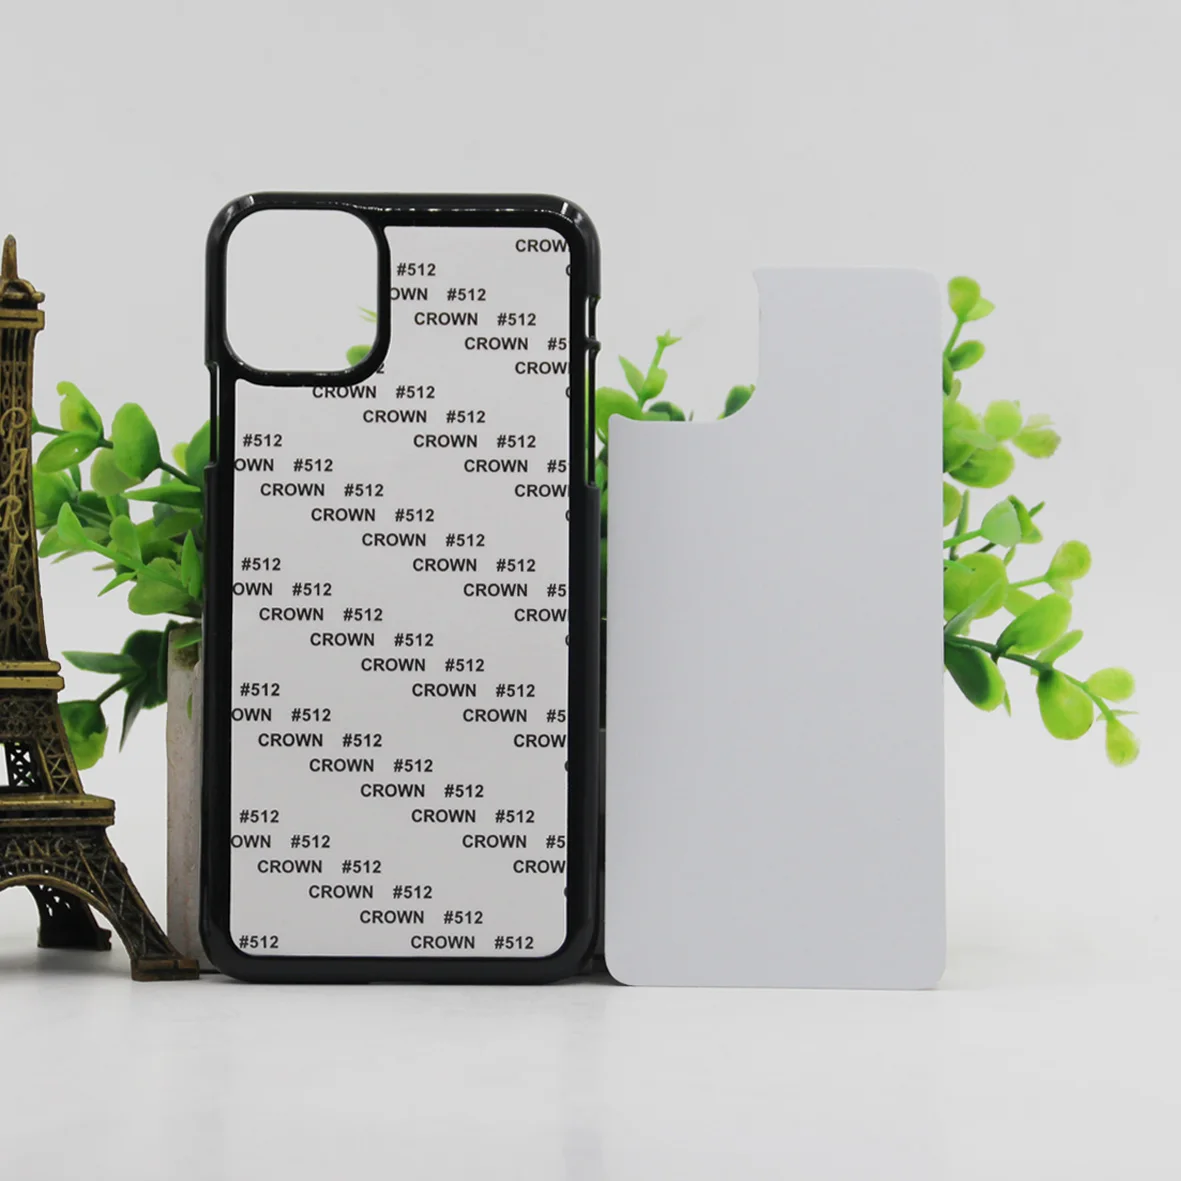 

2d 3d Rubber Tpu Sublimation Phone Case For iPhone 12 Pro Max Mini 5g With Blank Aluminium Plate Insert